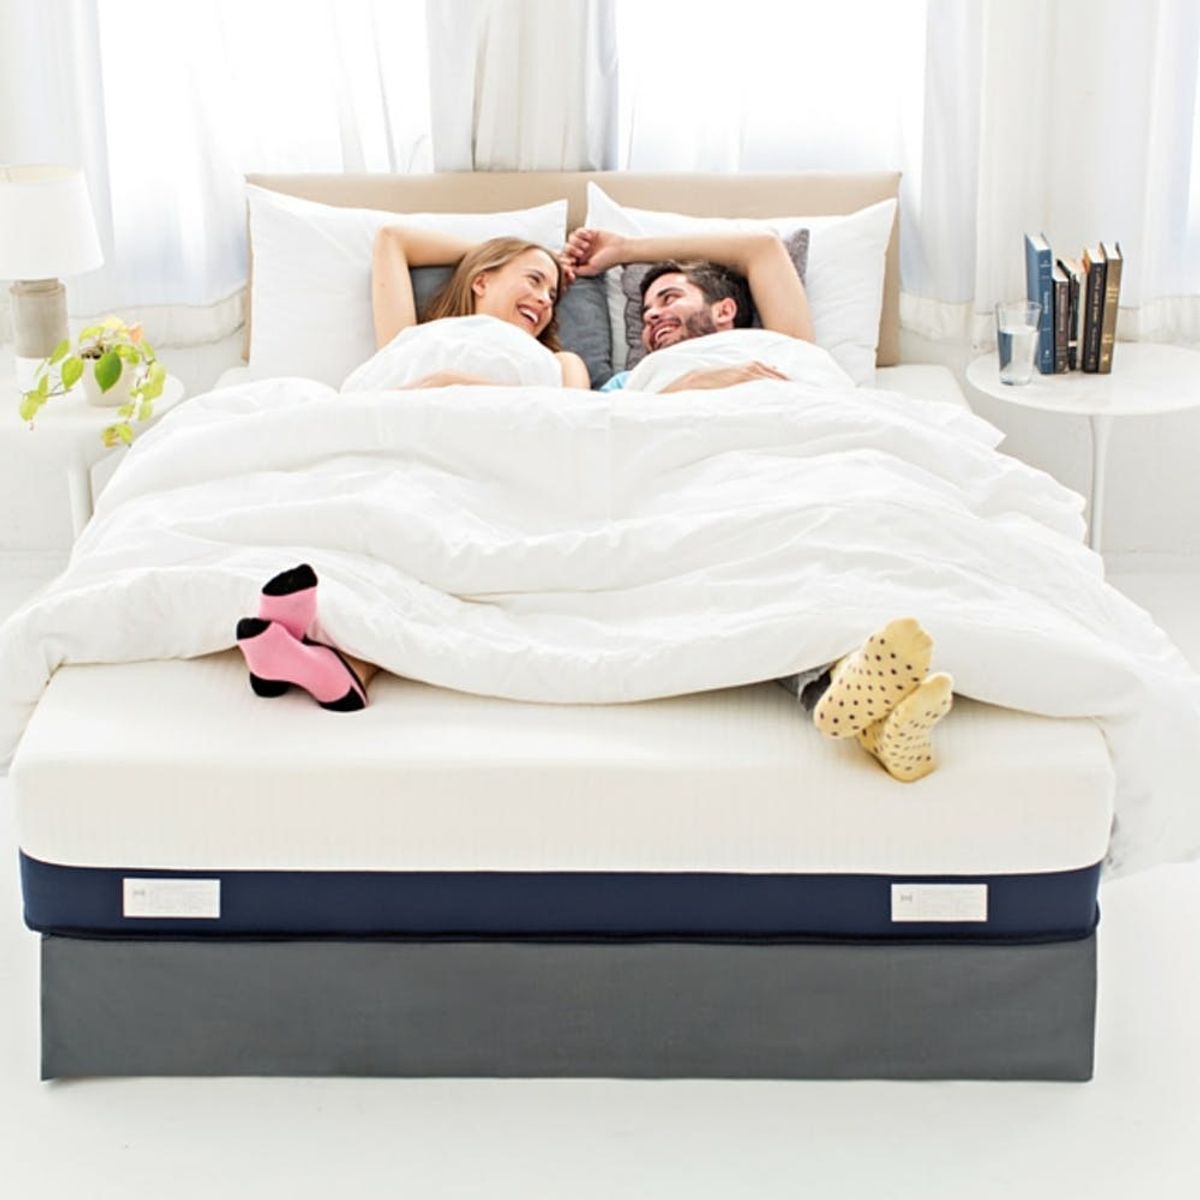 6 Insider Tips to Buying Your First Real Mattress